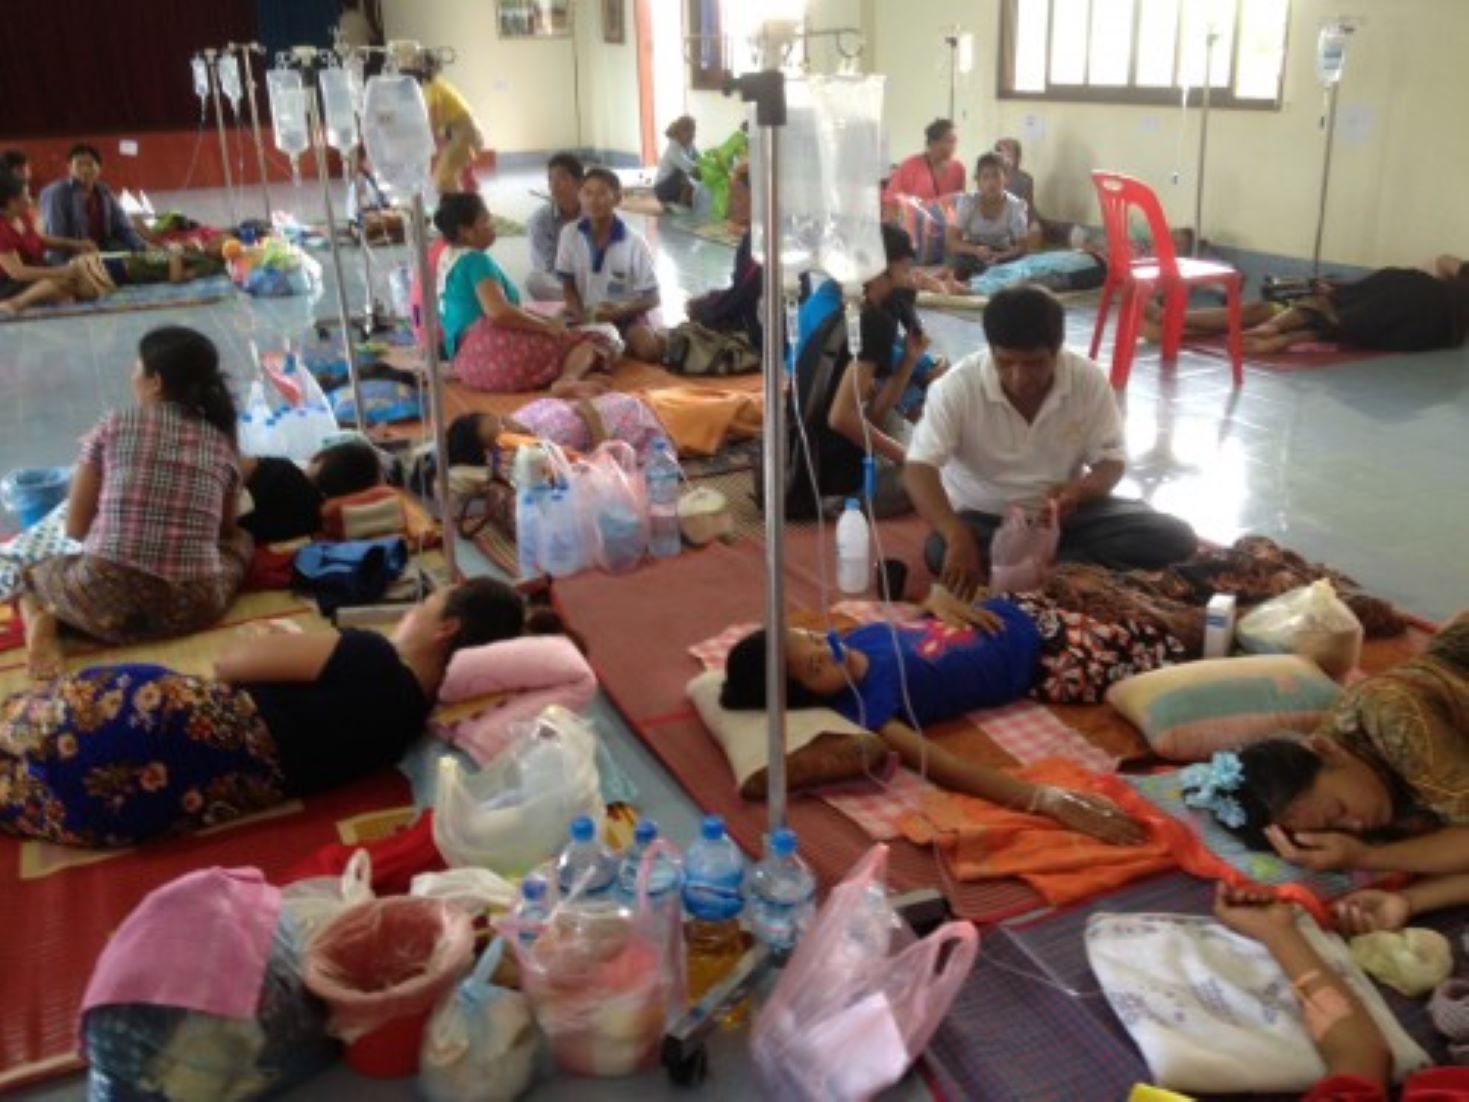 Dengue Fever Cases In Laos Increased To 2,041